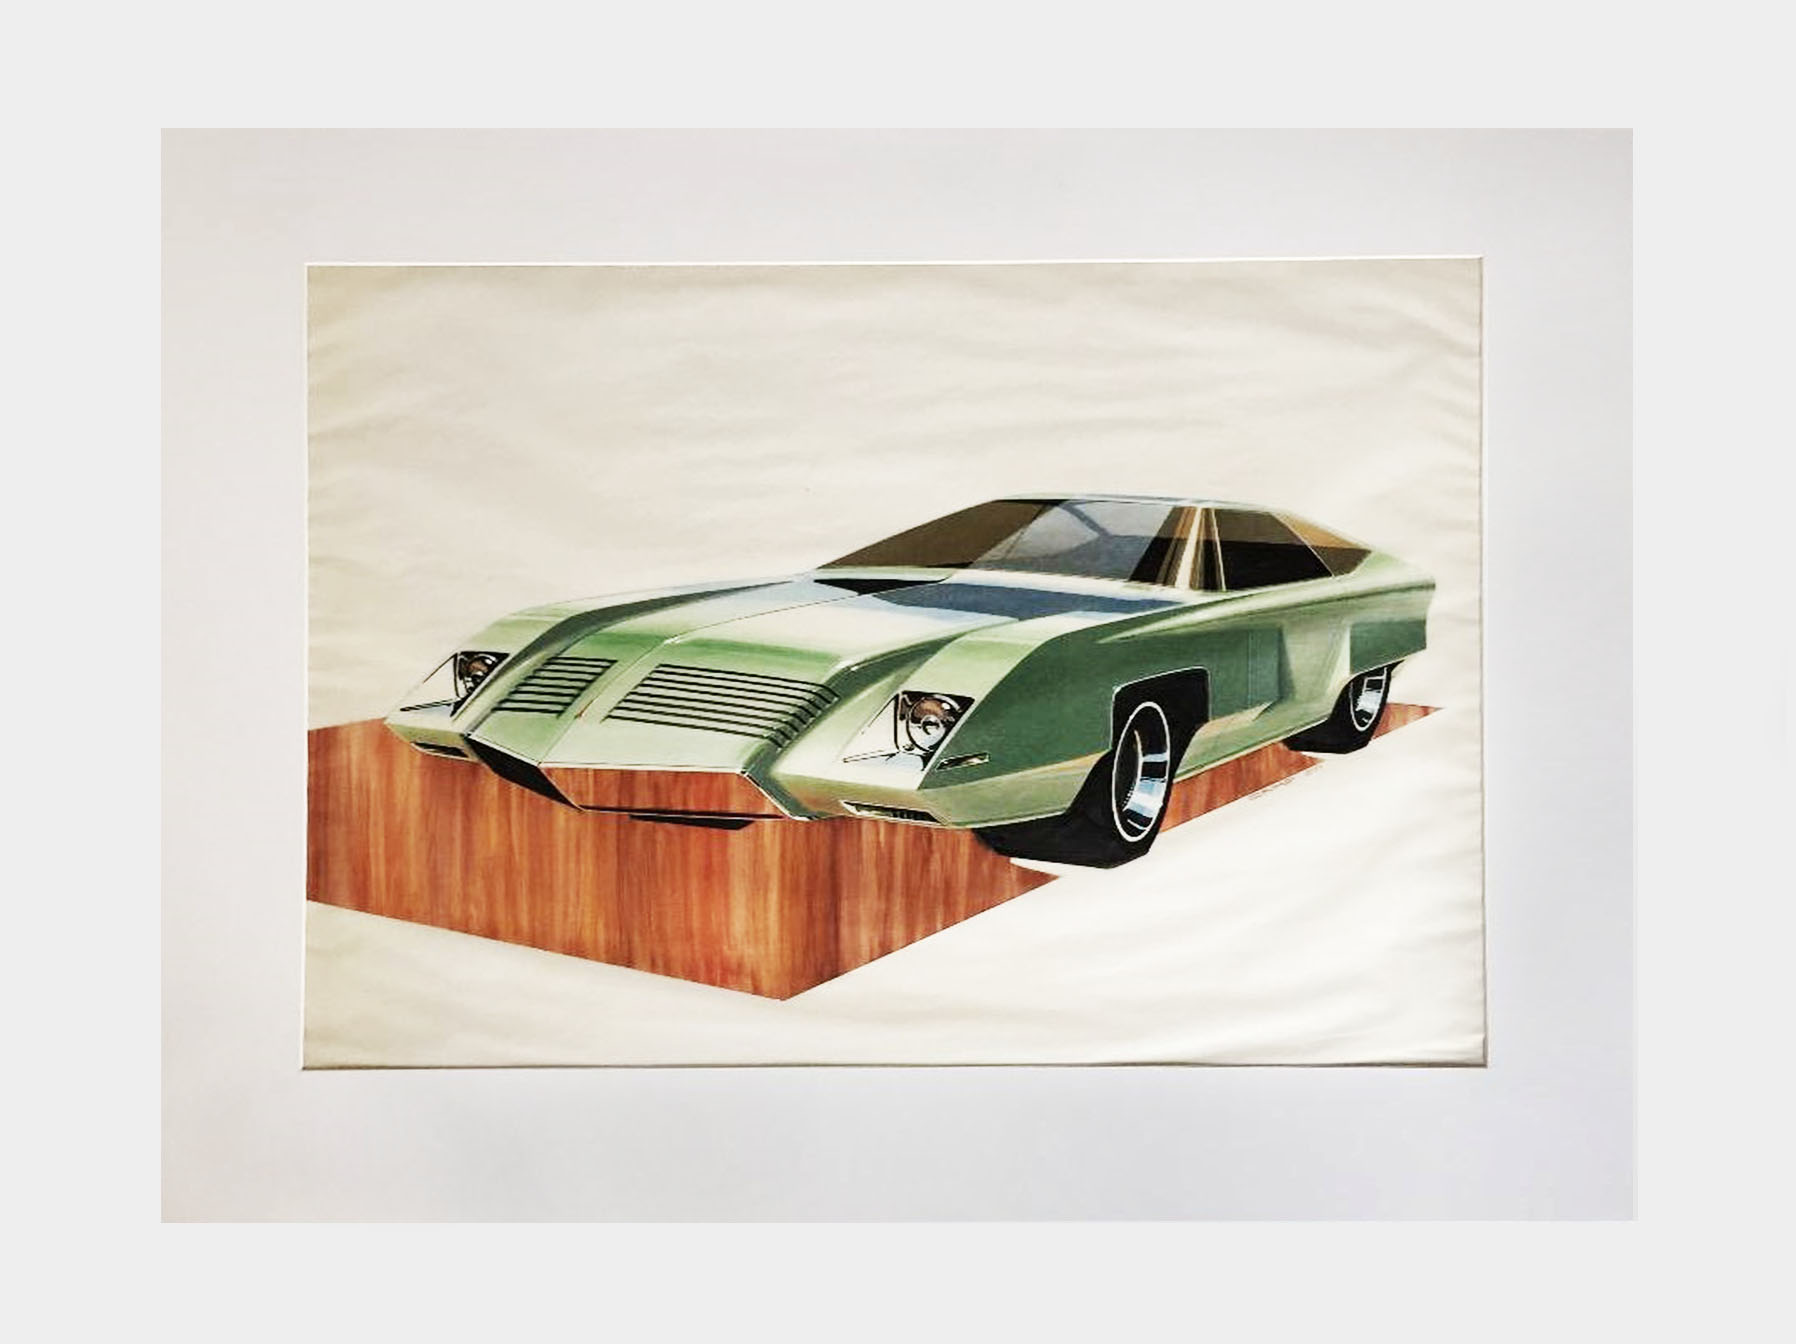 George Camp GM Oldsmobile concept car 1971 (Marker and Gouache on paper)